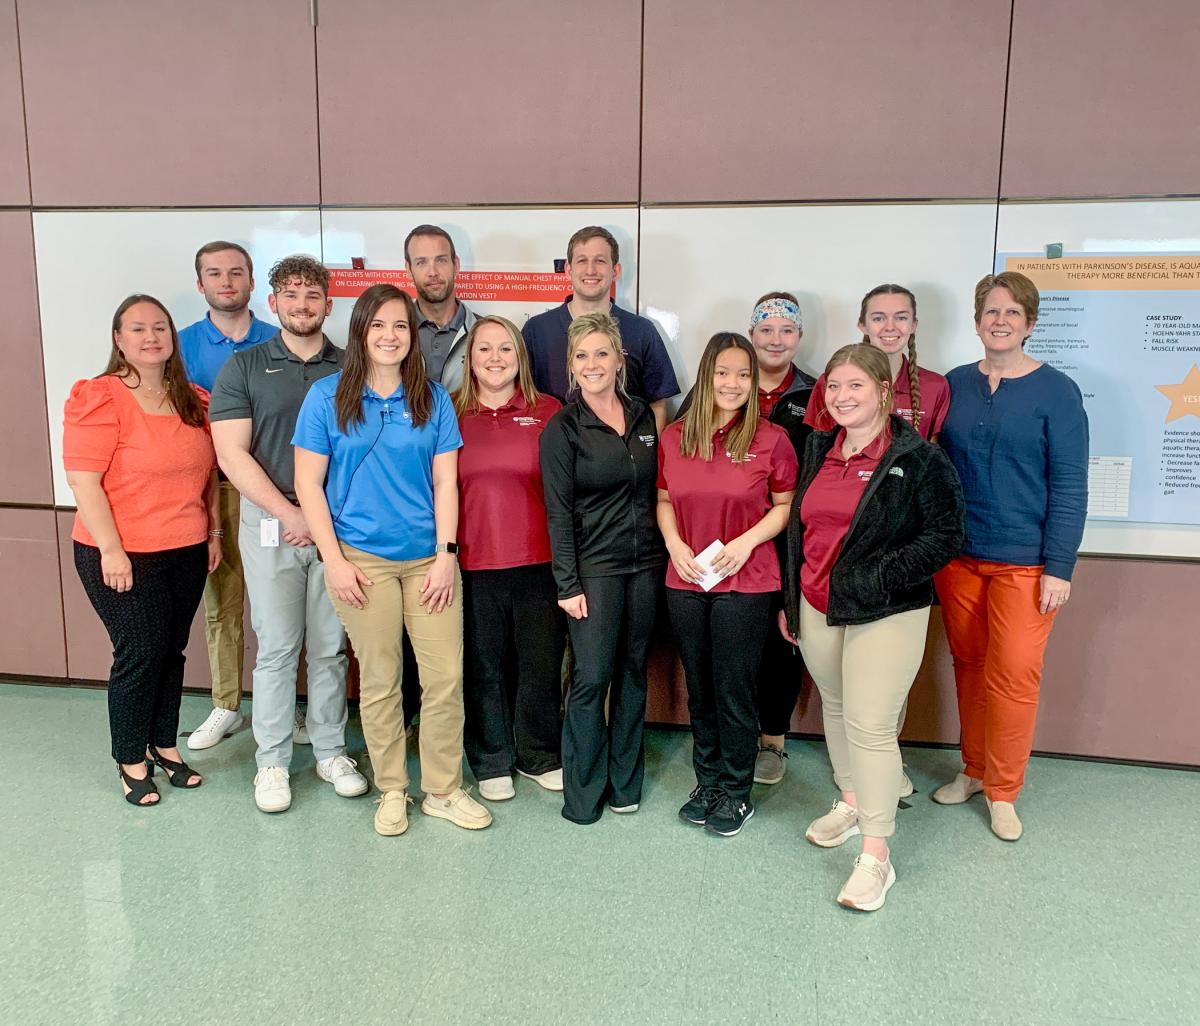 From left: Autumn M. Breon, part-time instructor of physical therapist assistant: rehab; Nathan M. Wolf; Nathan R. Hoyer; Janel A. Eck; Chance Moore; Lauren Bennett; Aric Root; Danielle R. Landis; Emily Smith; Sydney J. Keister; Selena A. Martinez; Kayleean Finan; and Christine A. Tilburg, clinical director of physical therapist assistant.